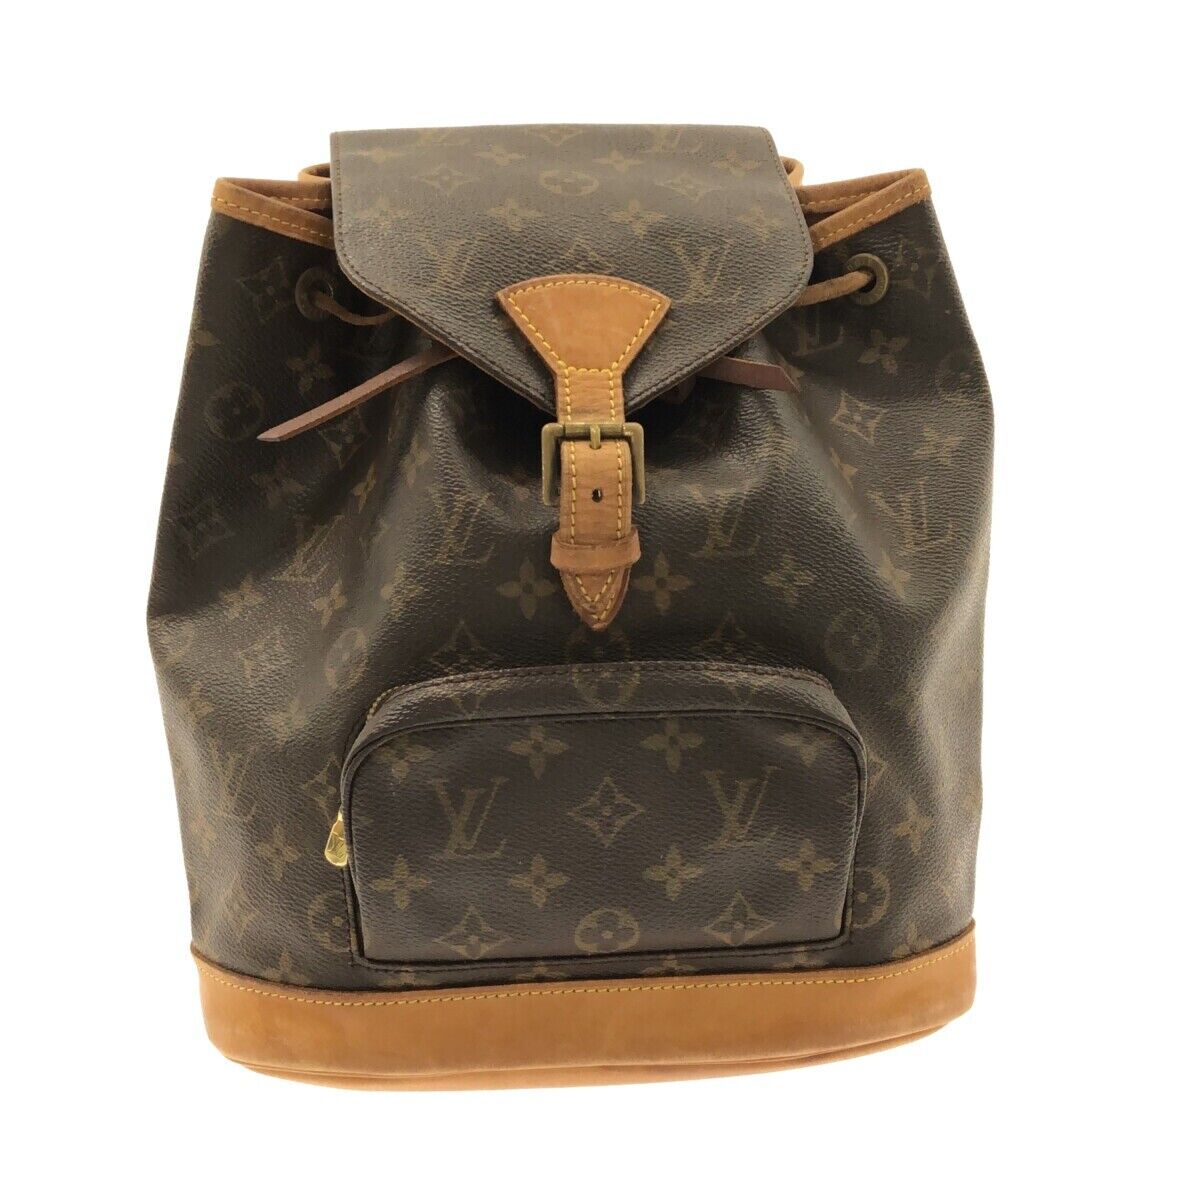 Buy Free Shipping Good Condition Louis Vuitton Louis Vuitton Monogram  Montsouris GM Backpack/Rucksack Men's Women's from Japan - Buy authentic  Plus exclusive items from Japan